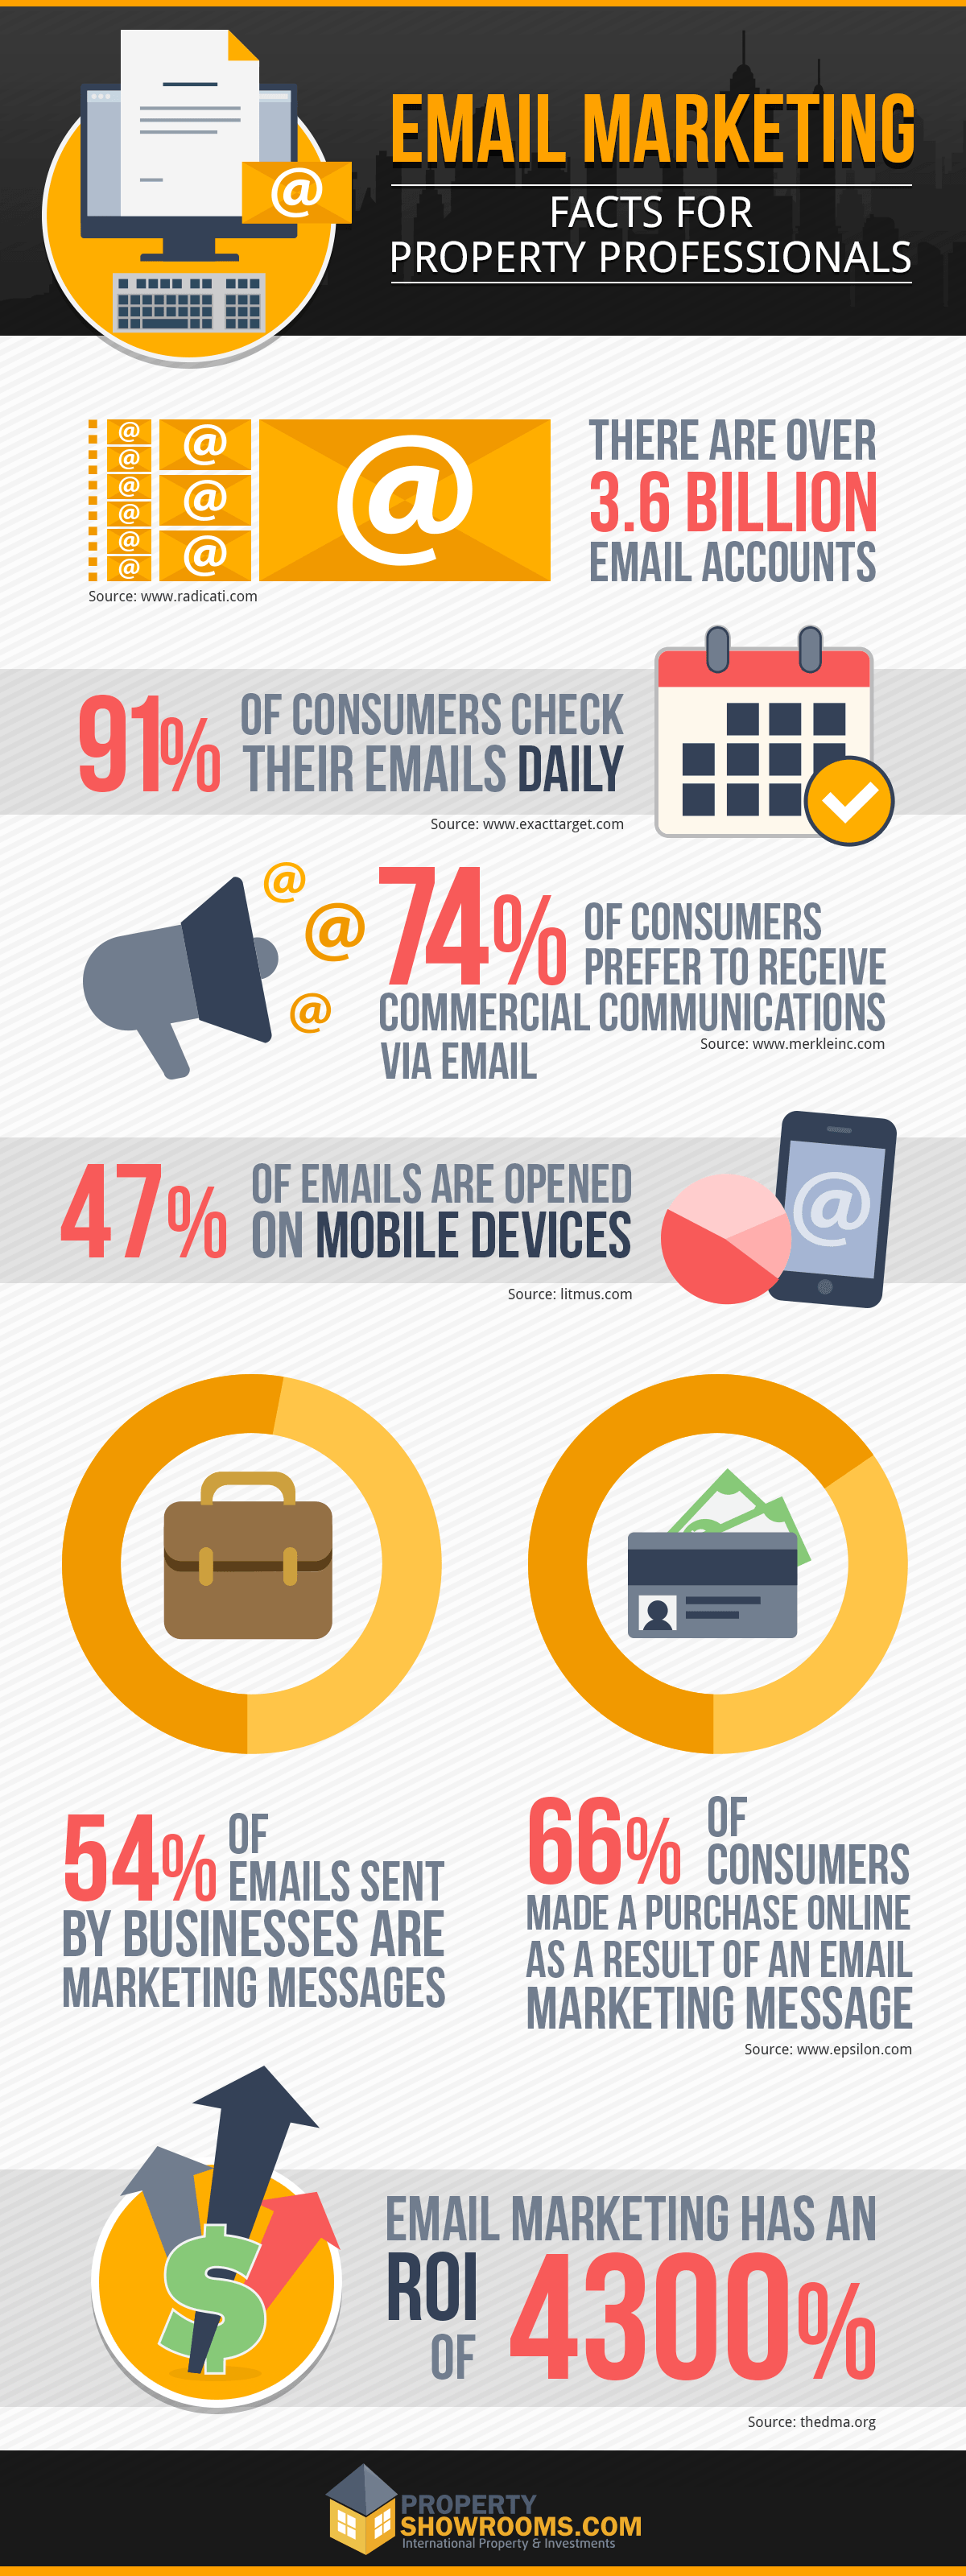 Email marketing - facts for property professionals